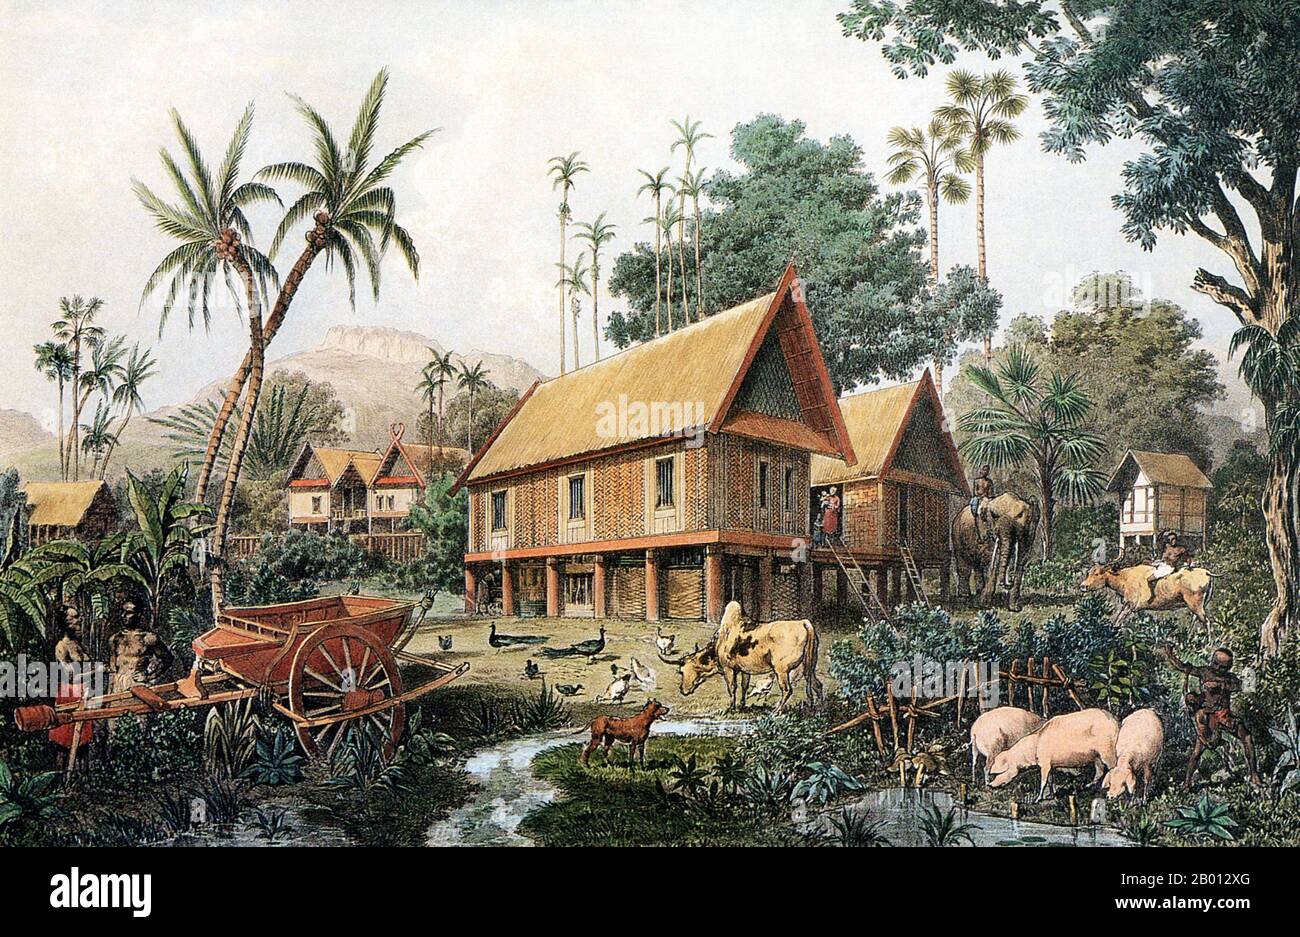 Laos: The house of a wealthy Laotian family. Engraving by Louis Delaporte (1842-1925), 1866-1867.  The house is made of rattan and bamboo. It is supported by hardwood stilts to protect the building in Monsoon season. Under the house is a chicken run and pig sty. Peacocks roam in the garden, and the hamlet is surrounded by coconut palms. Stock Photo